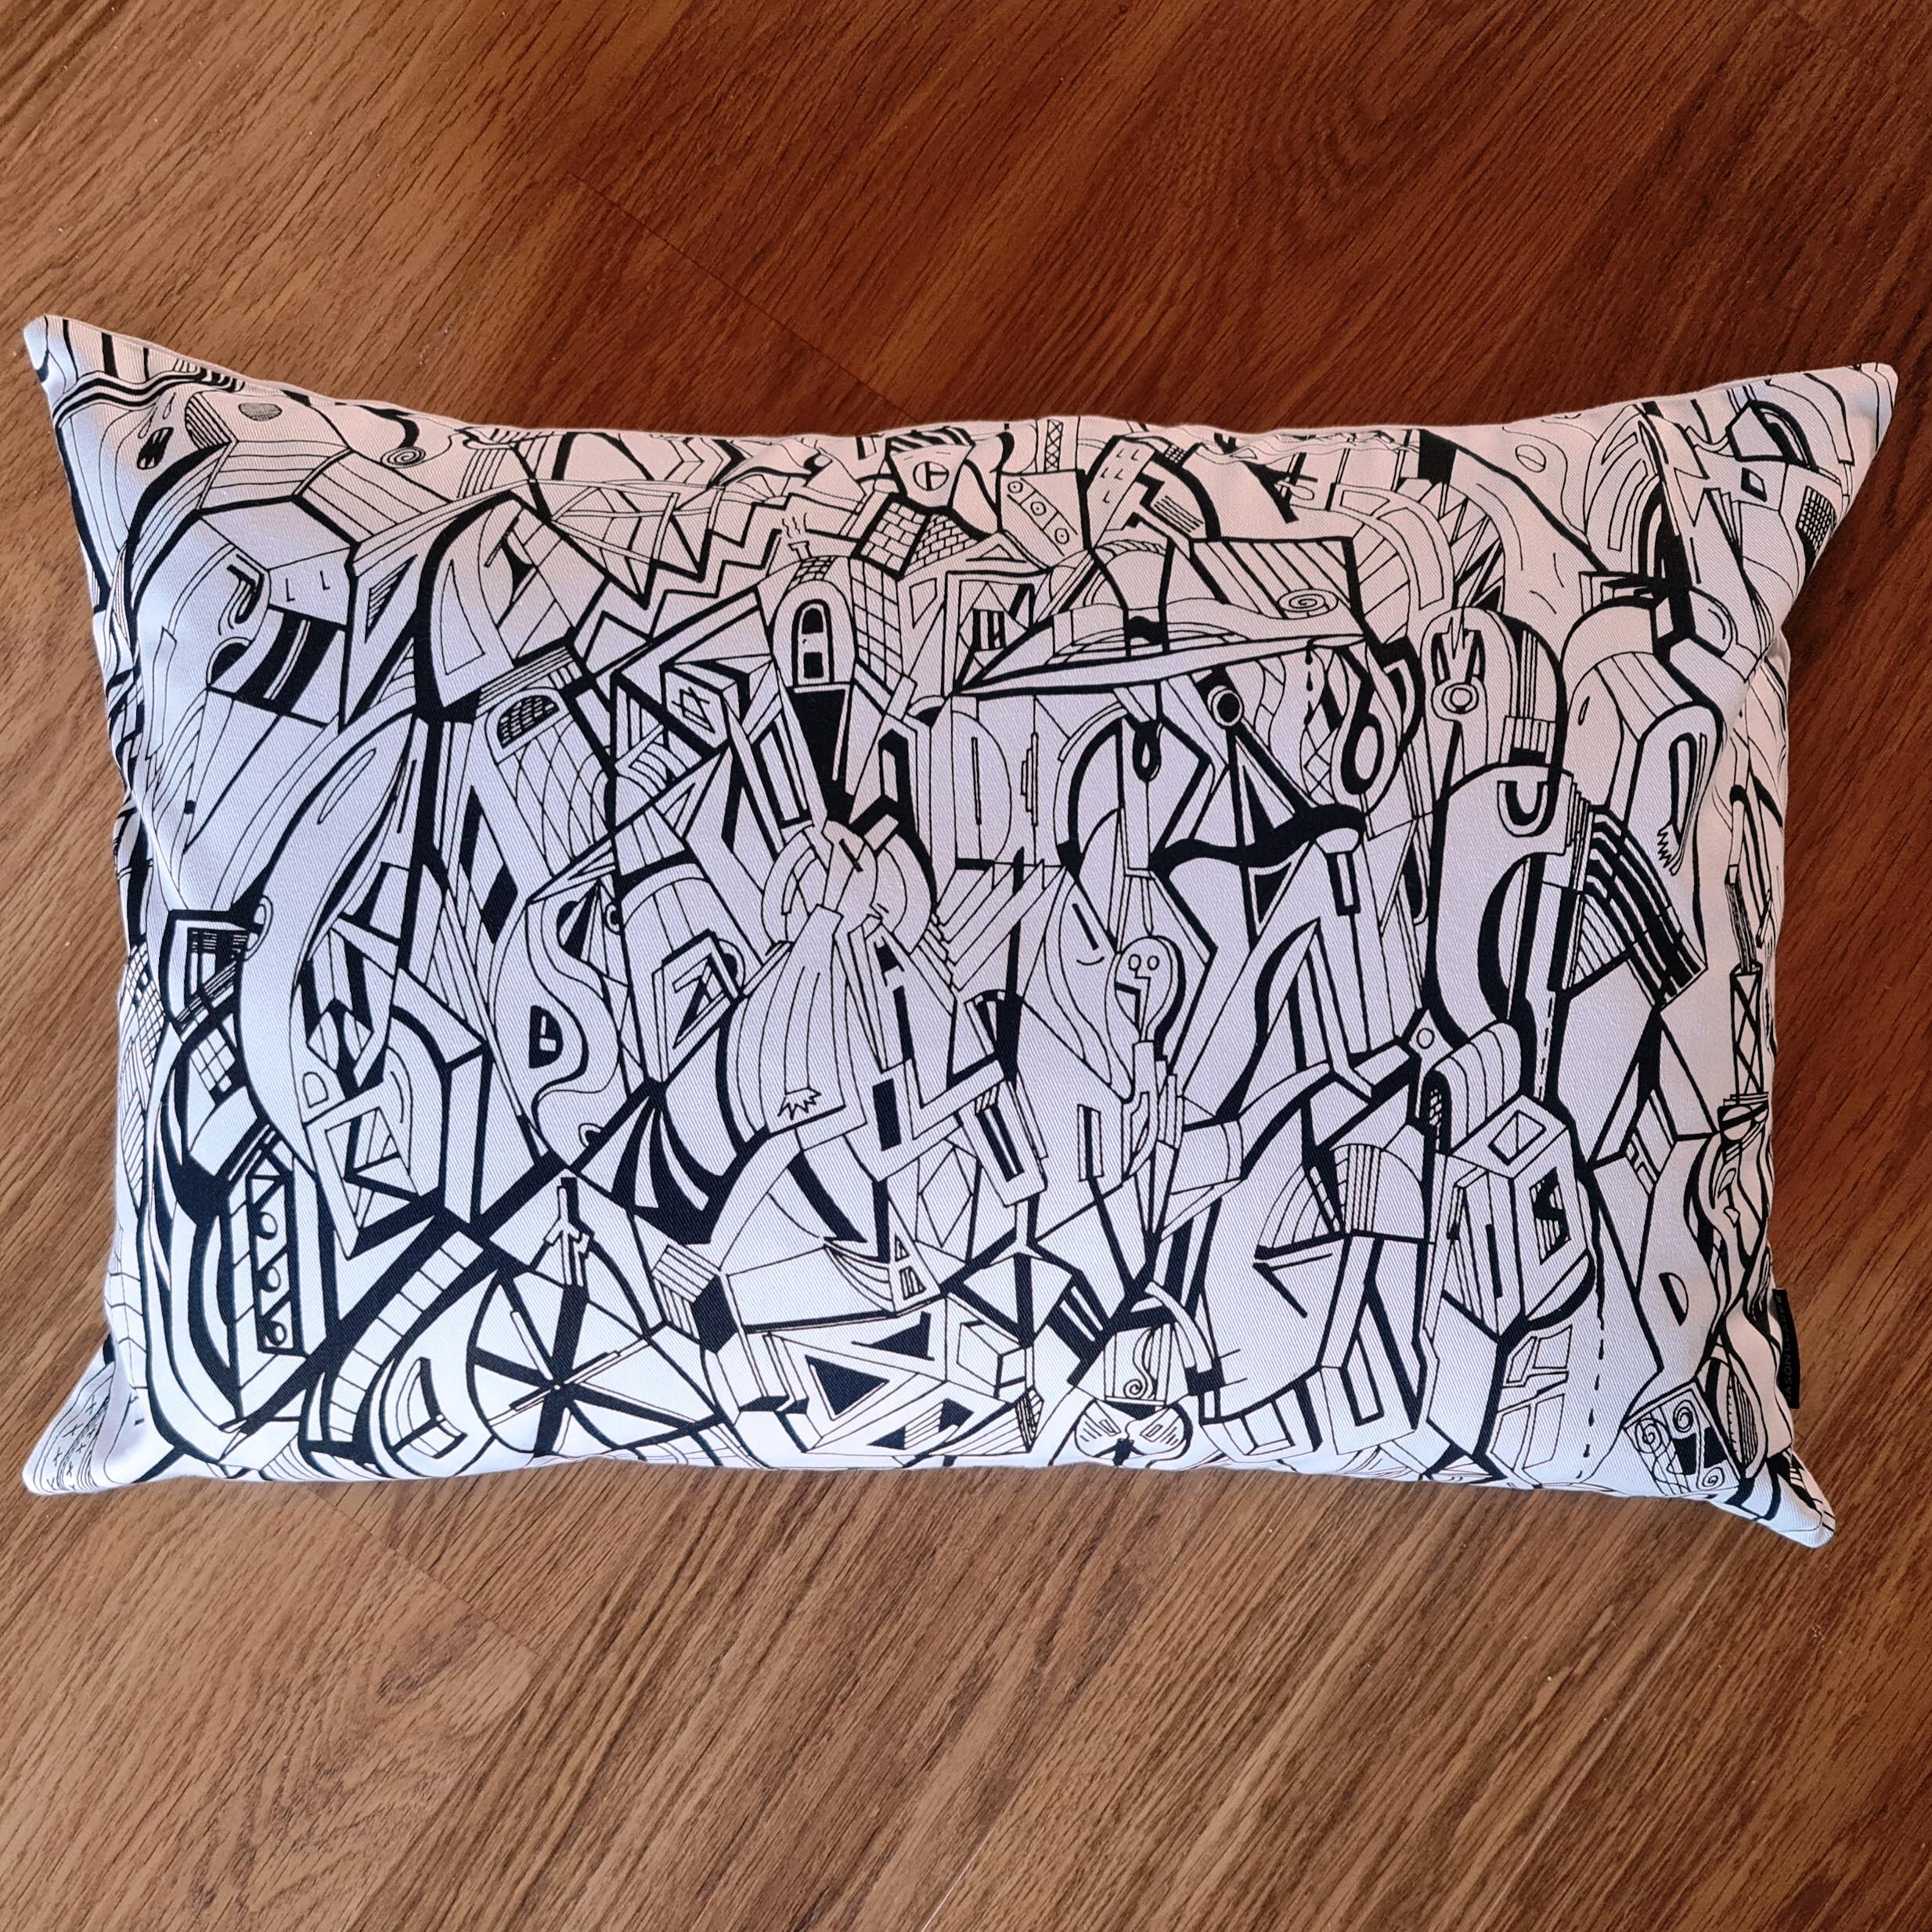 Cream coloured cotton rectangular cushion with artwork from Jason Clarke printed on the front.